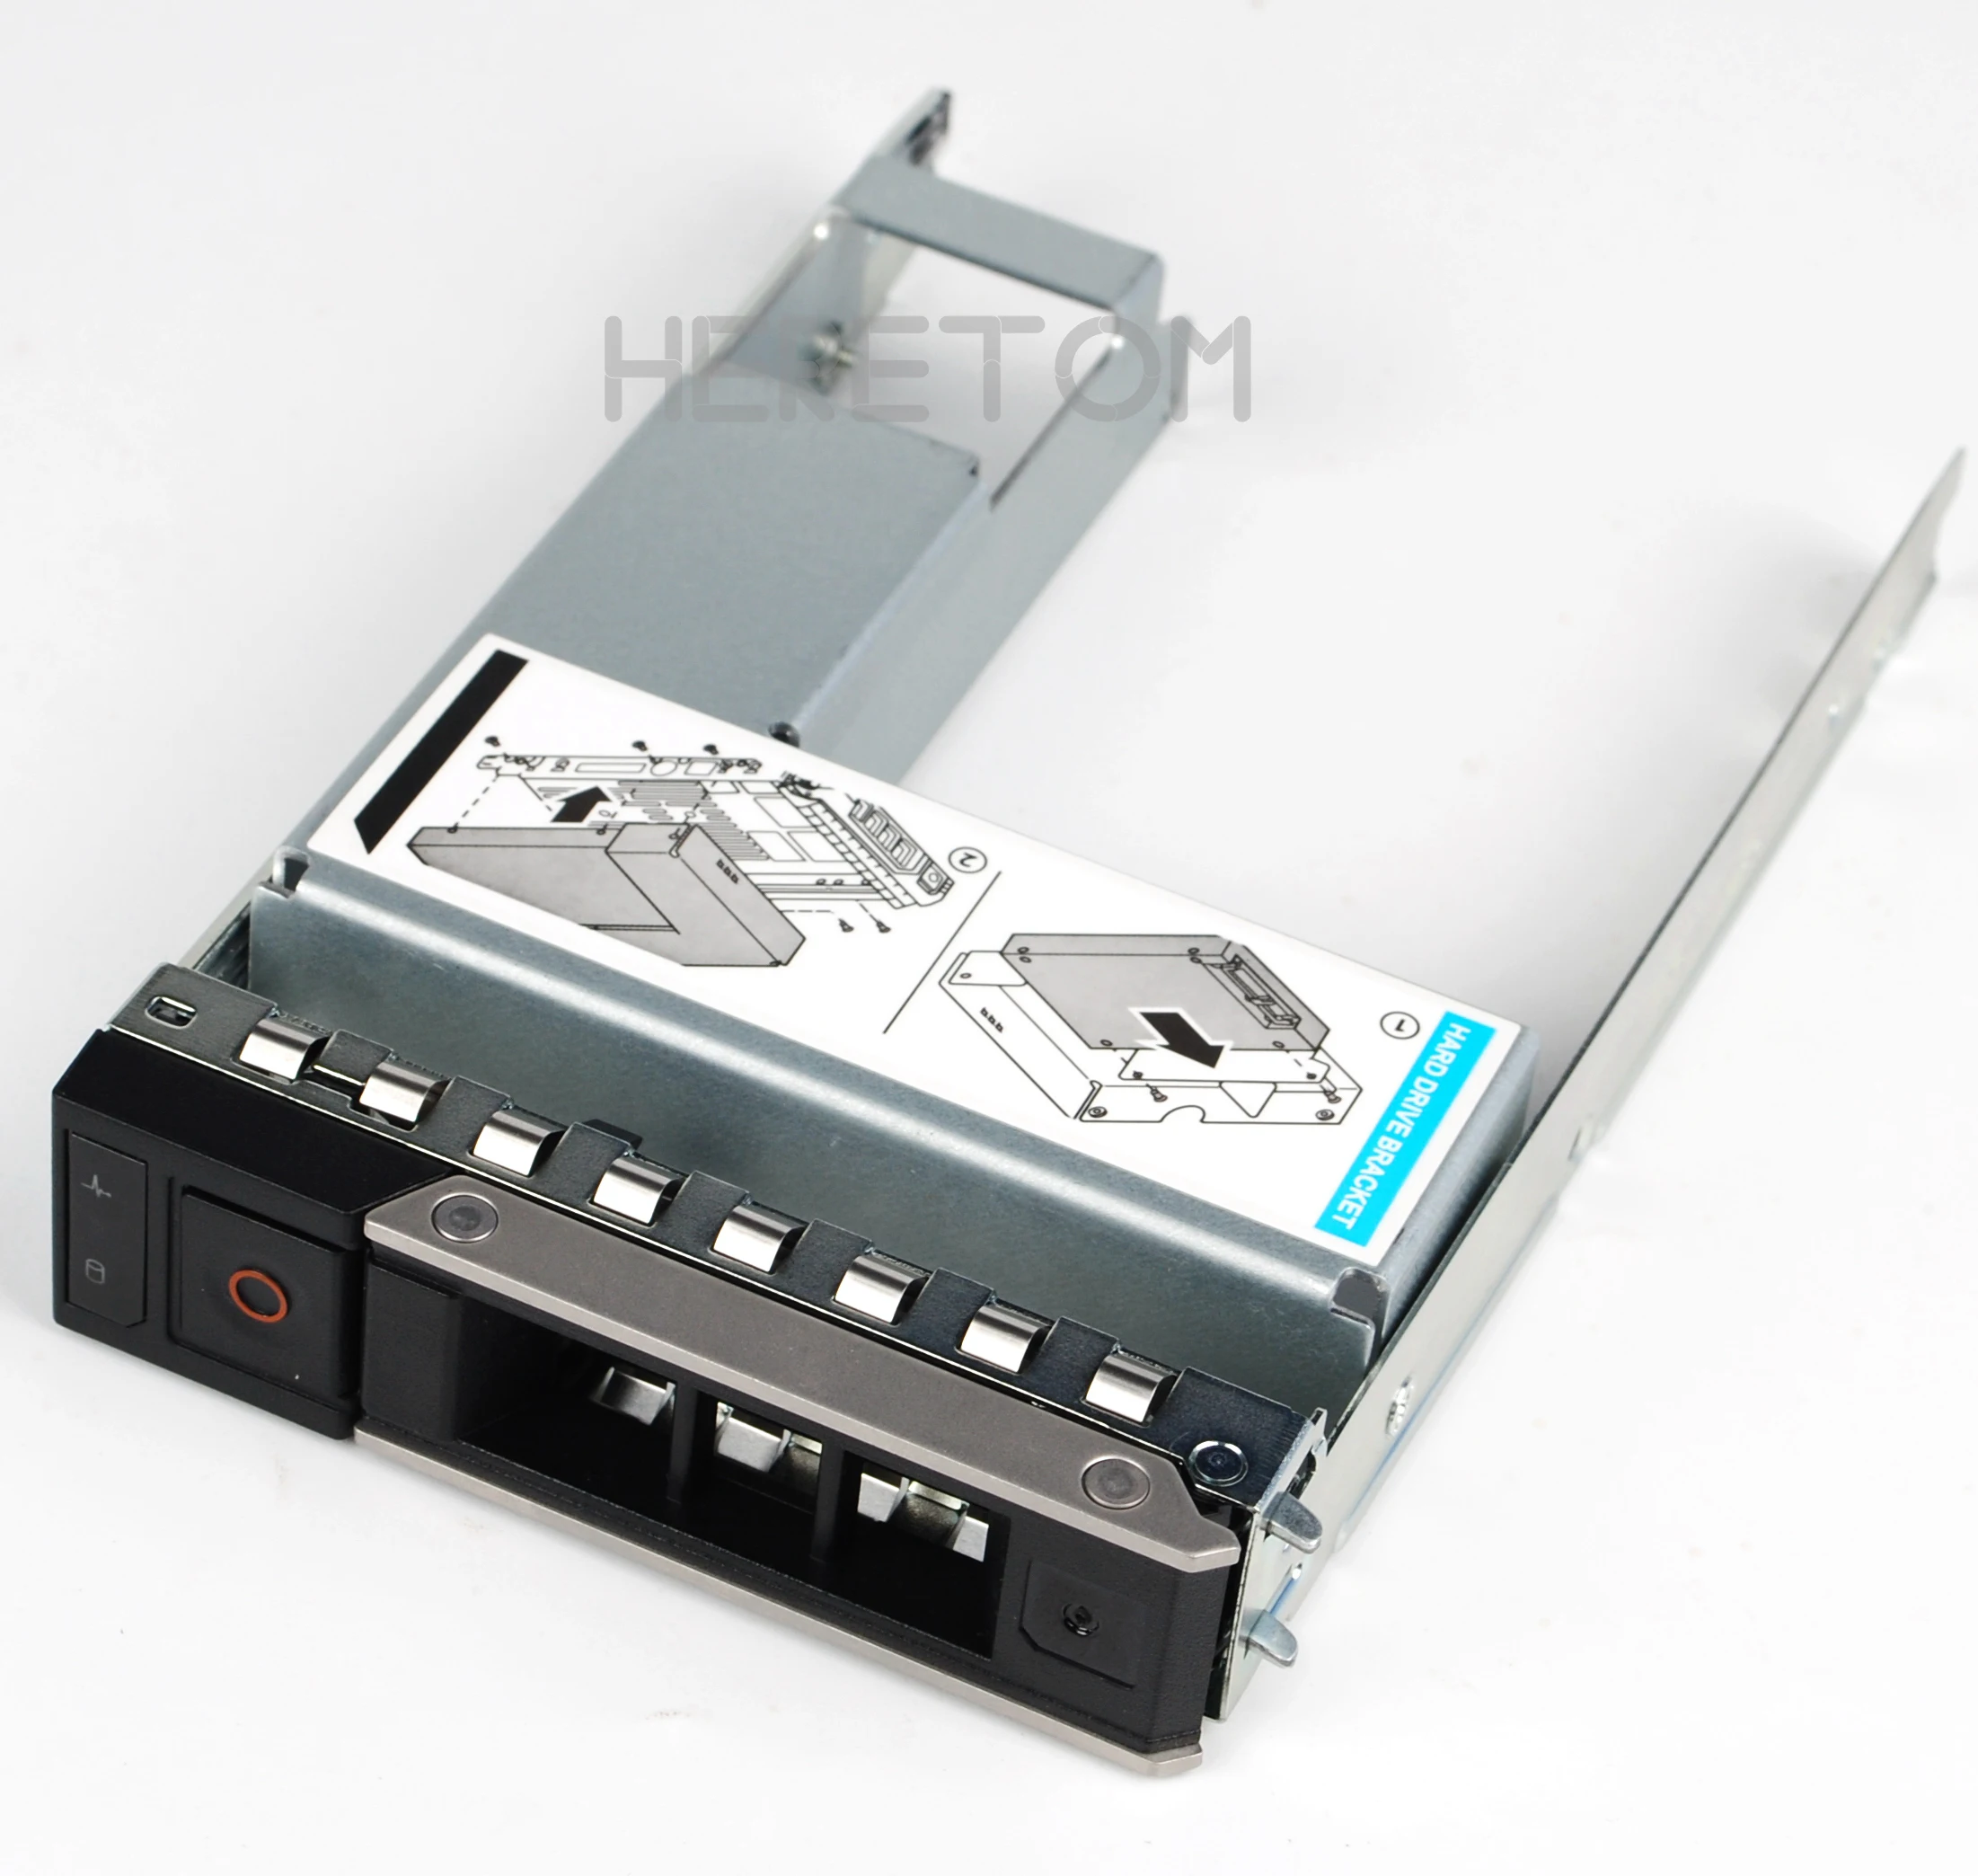 New 3.5" Inch HDD Hard Drive Tray Caddy w/2.5" Adapter For Dell POWEREDGE R540 